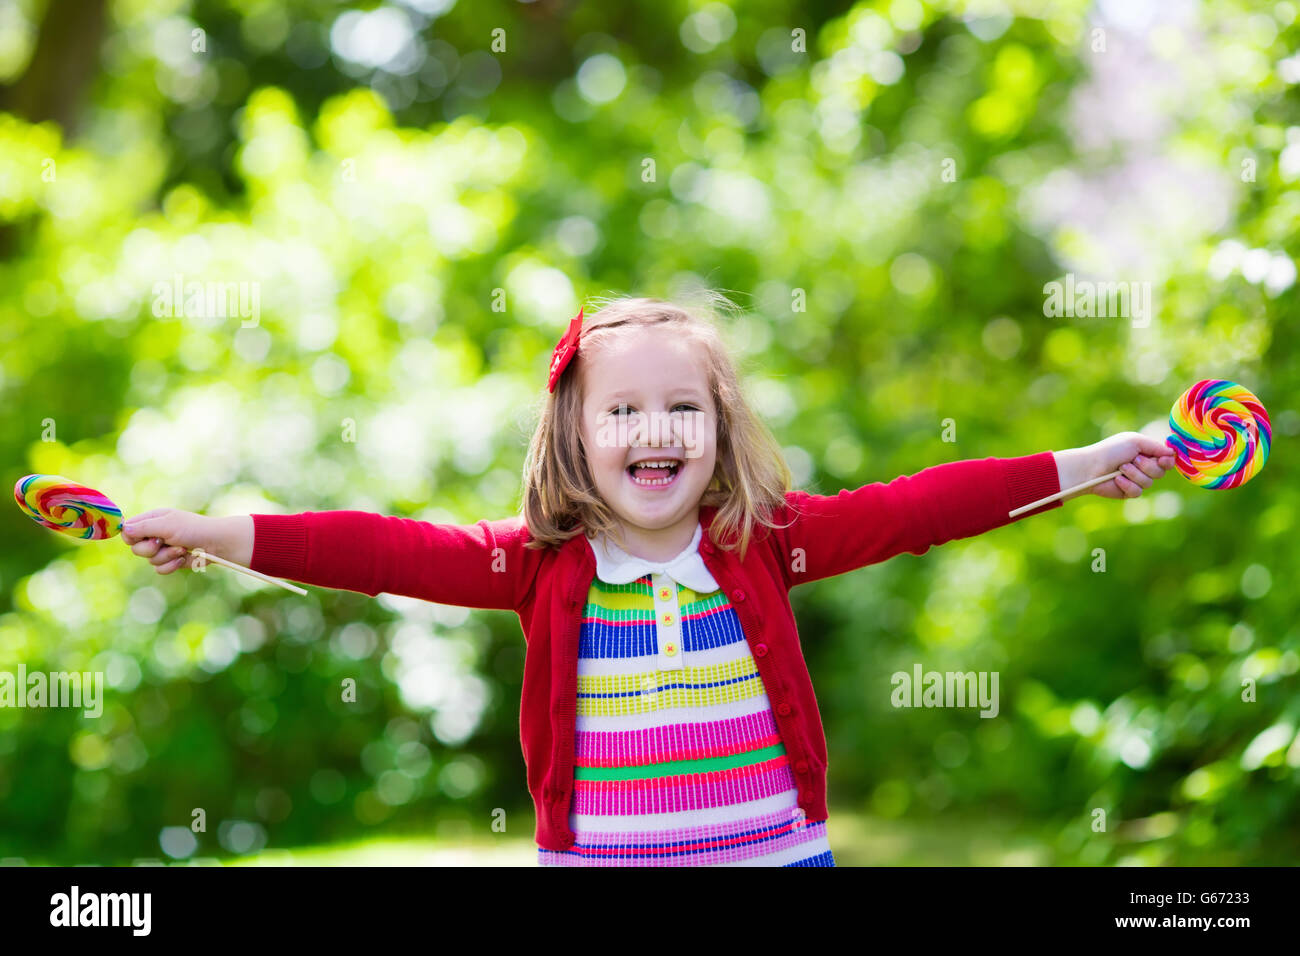 Cute little girl with big colorful lollipop. Child eating sweet candy bar. Sweets for young kids. Summer outdoor fun. Stock Photo